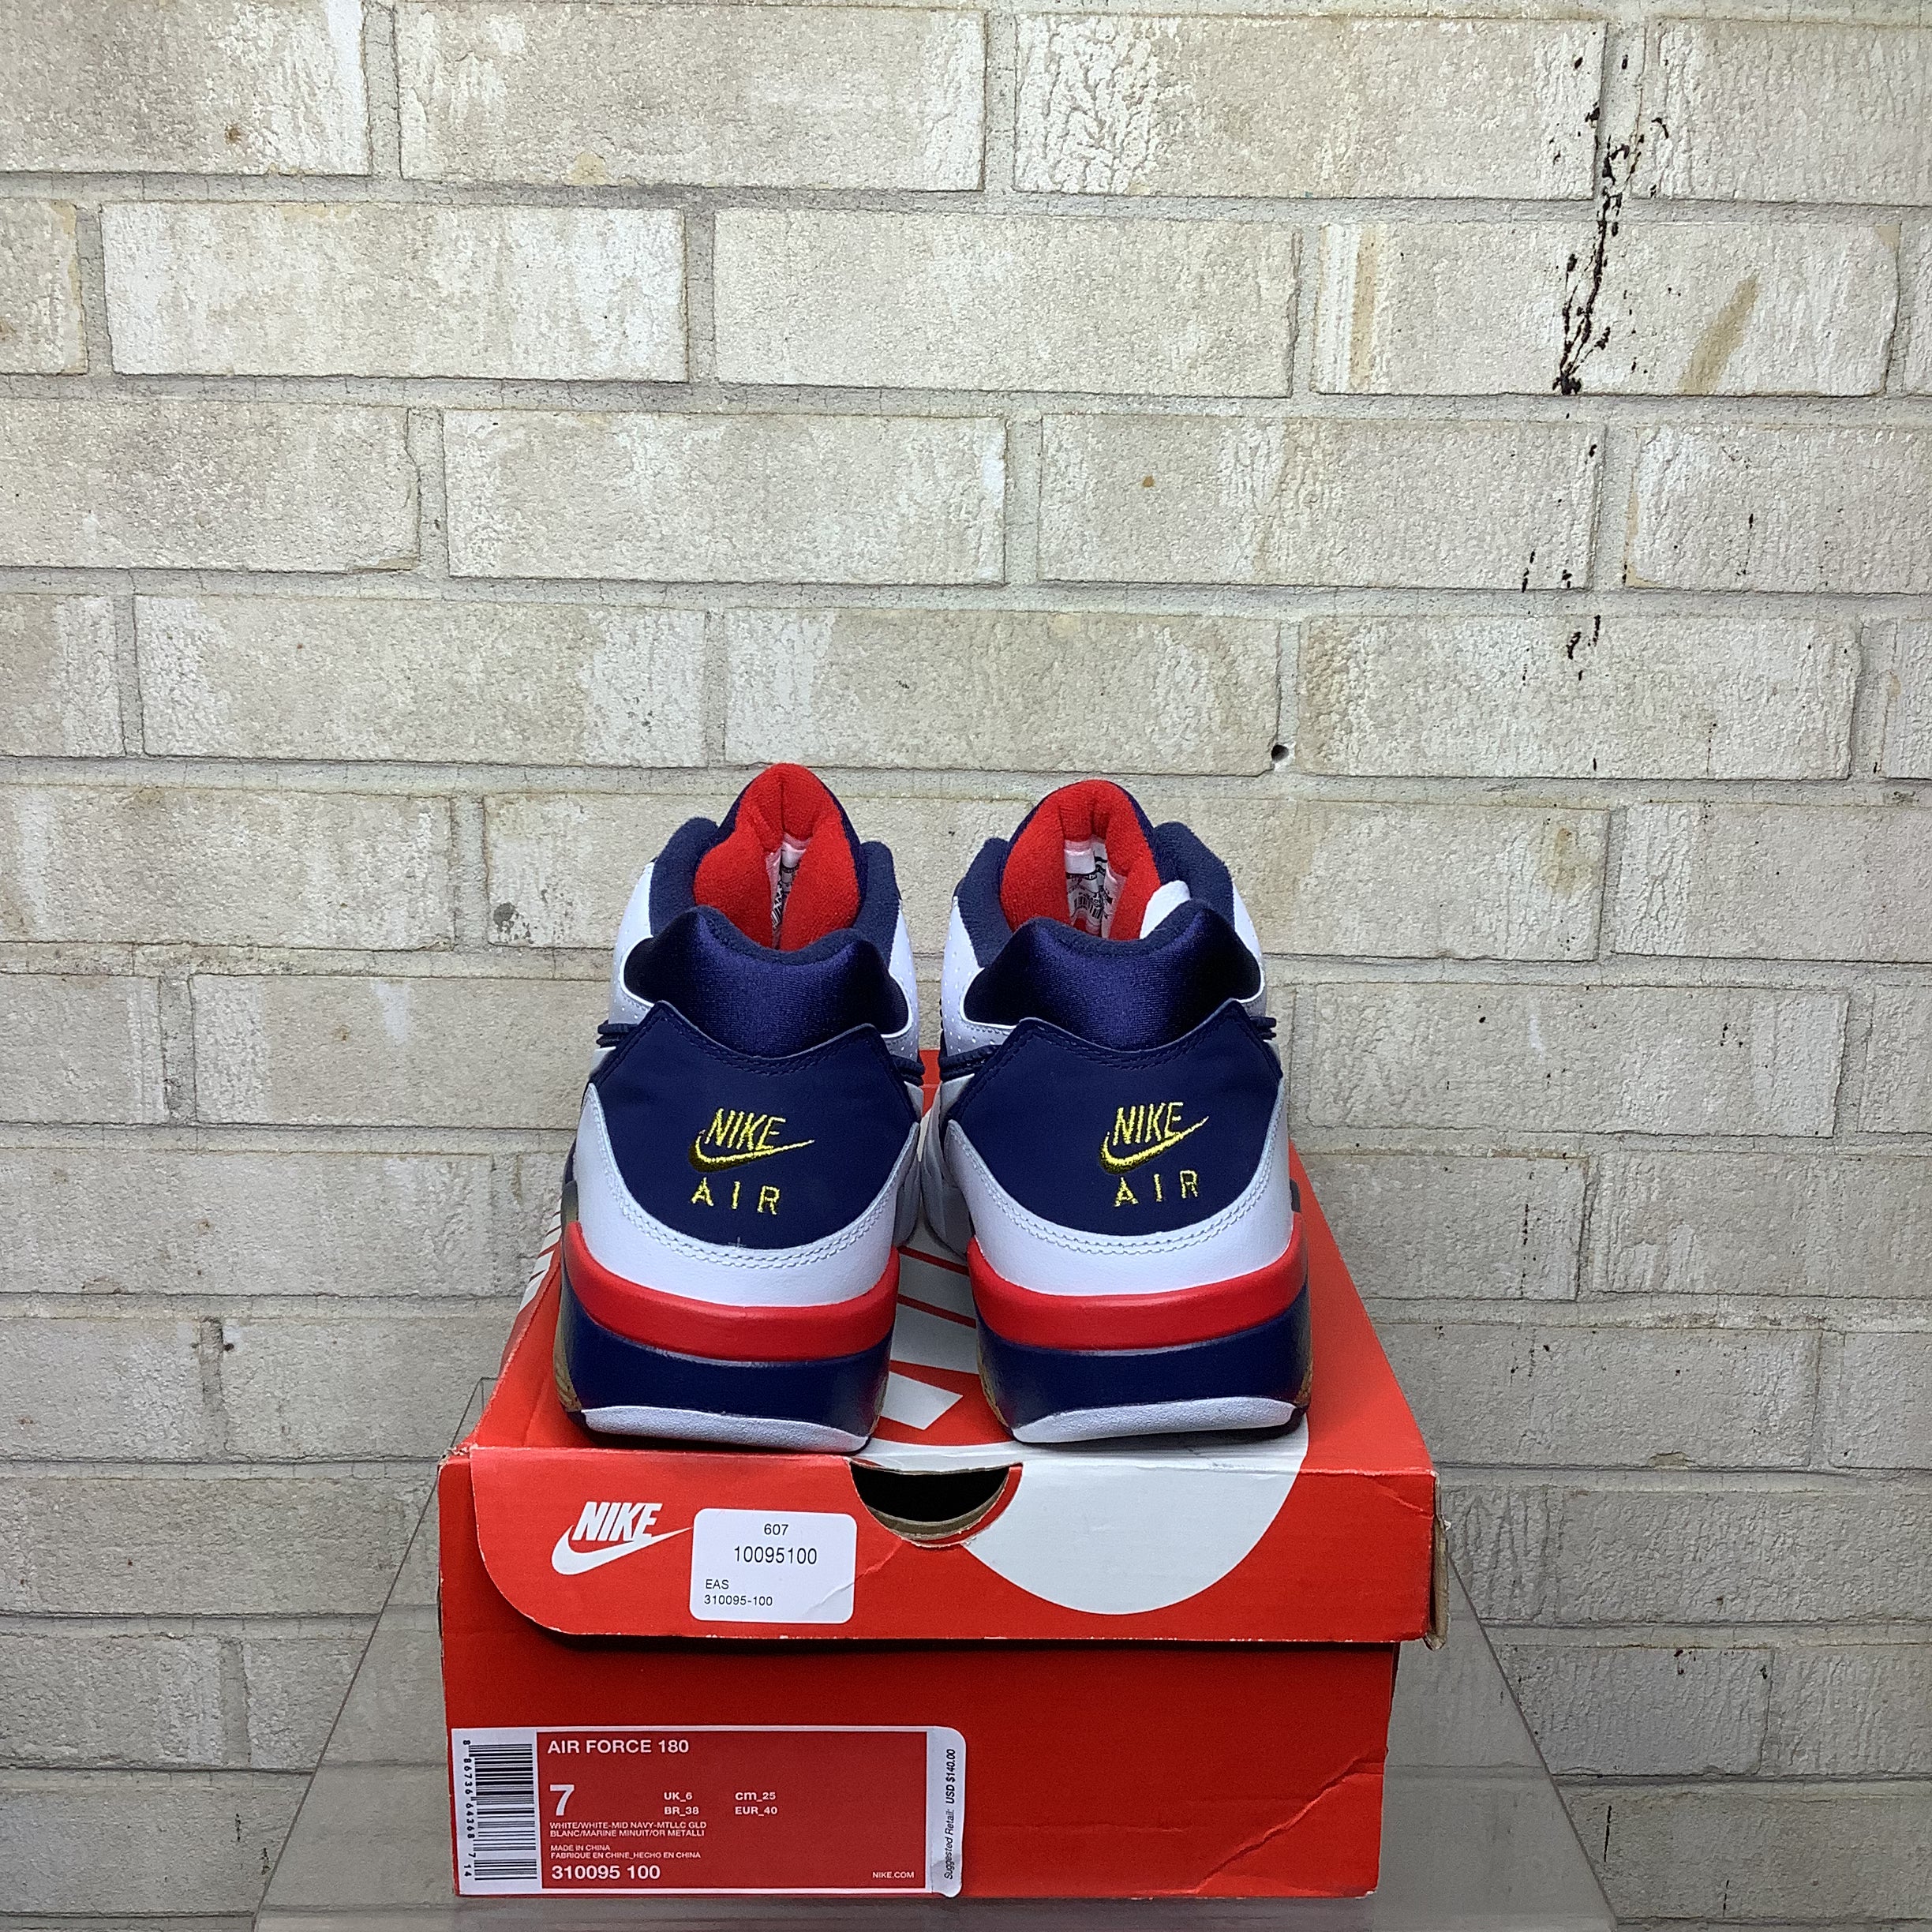 NIKE AIR FORCE 180 OLYMPIC SIZE 7 310095-100